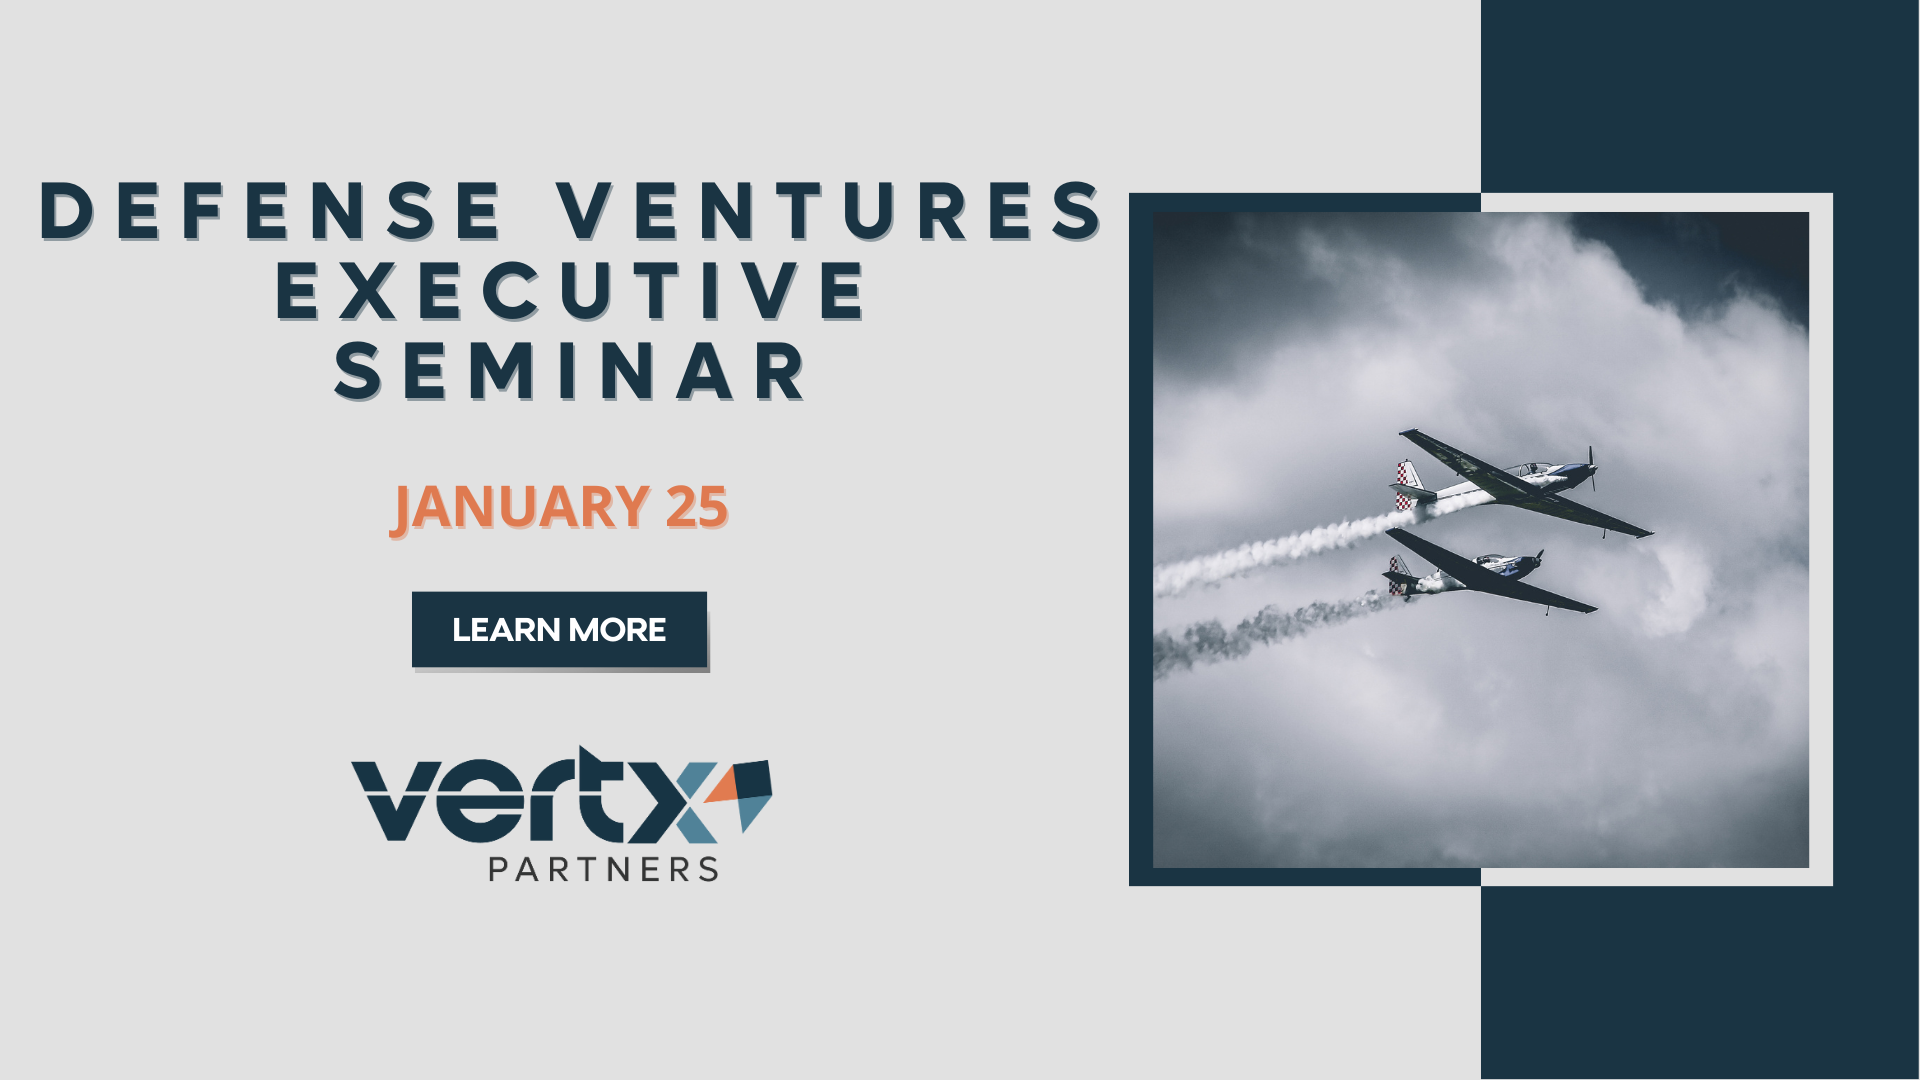 This graphic has the title Defense Ventures Executive Seminar with the date January 25th underneath and a photo to the right of two planes flying in the air